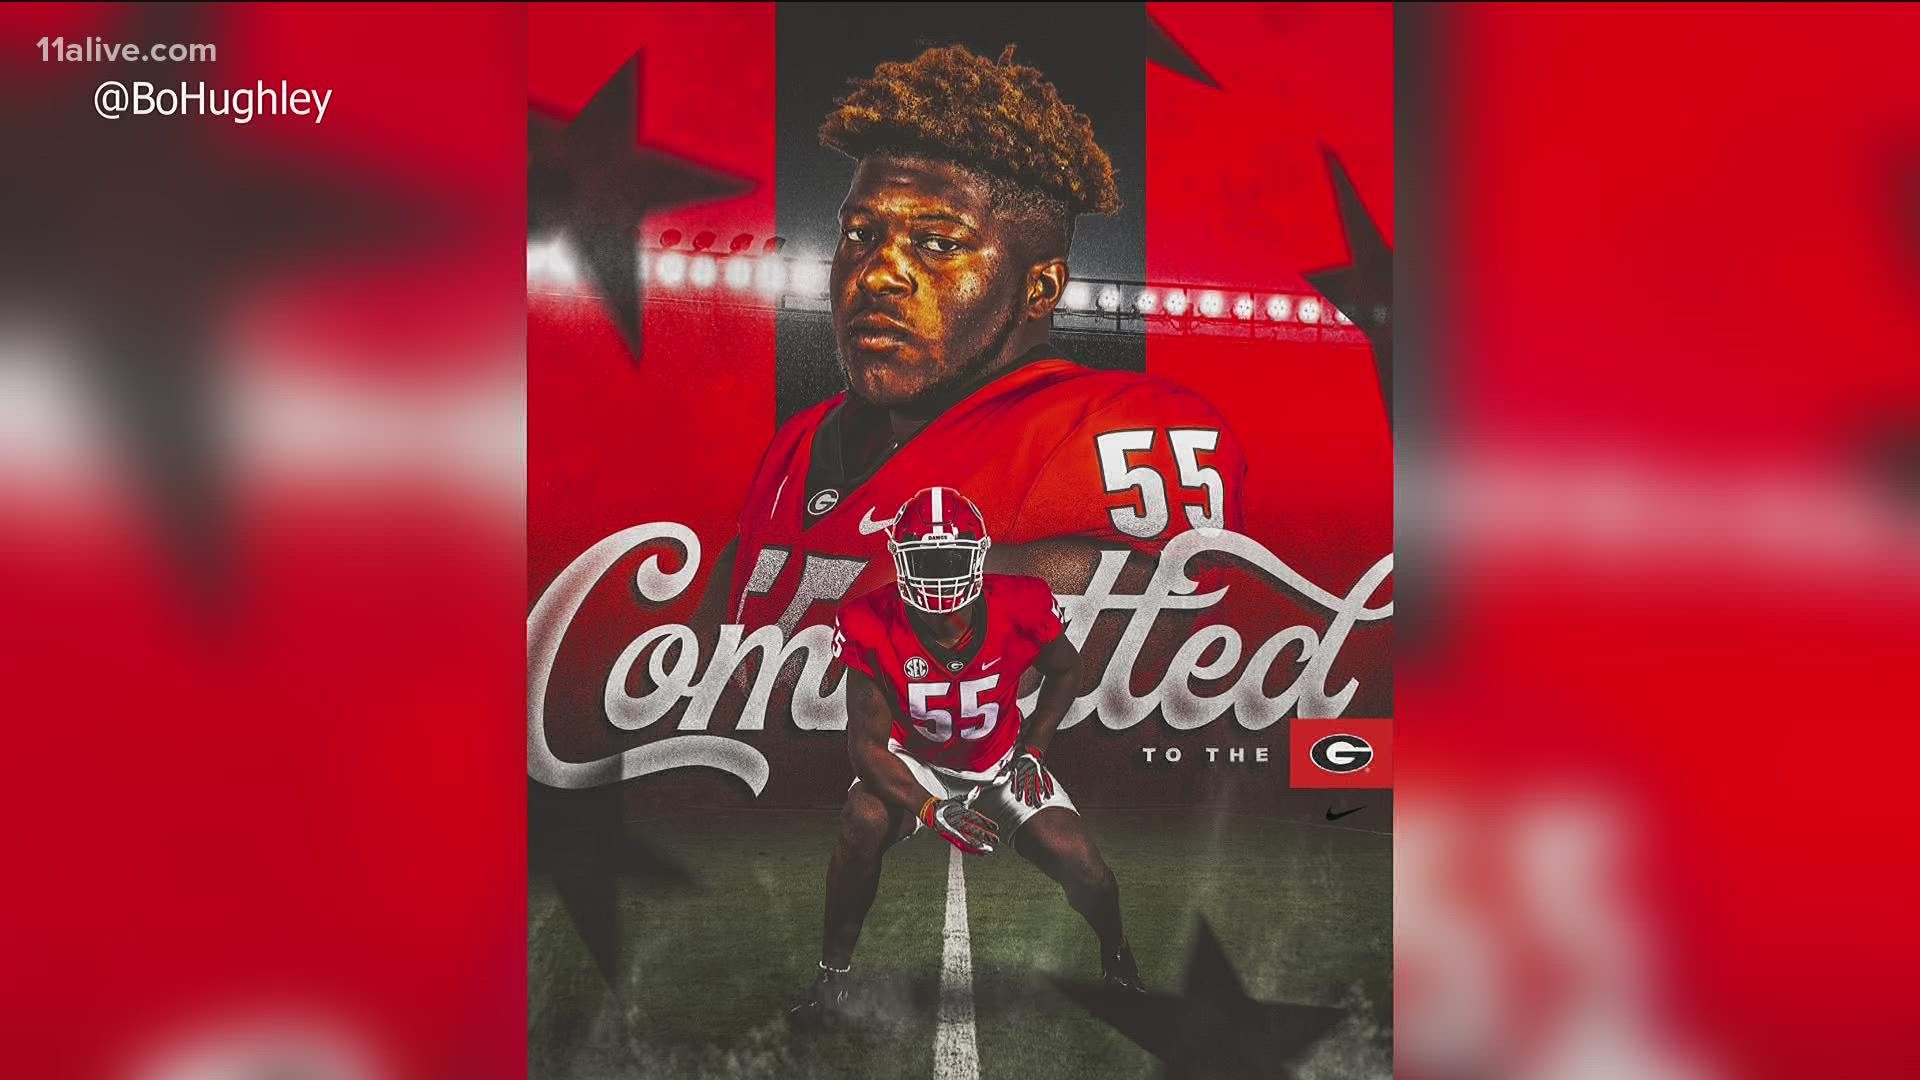 Johnathan “Bo” Hughley, one of the top recruits in the Class of 2023, has made his choice. He will play college football for the University of Georgia.